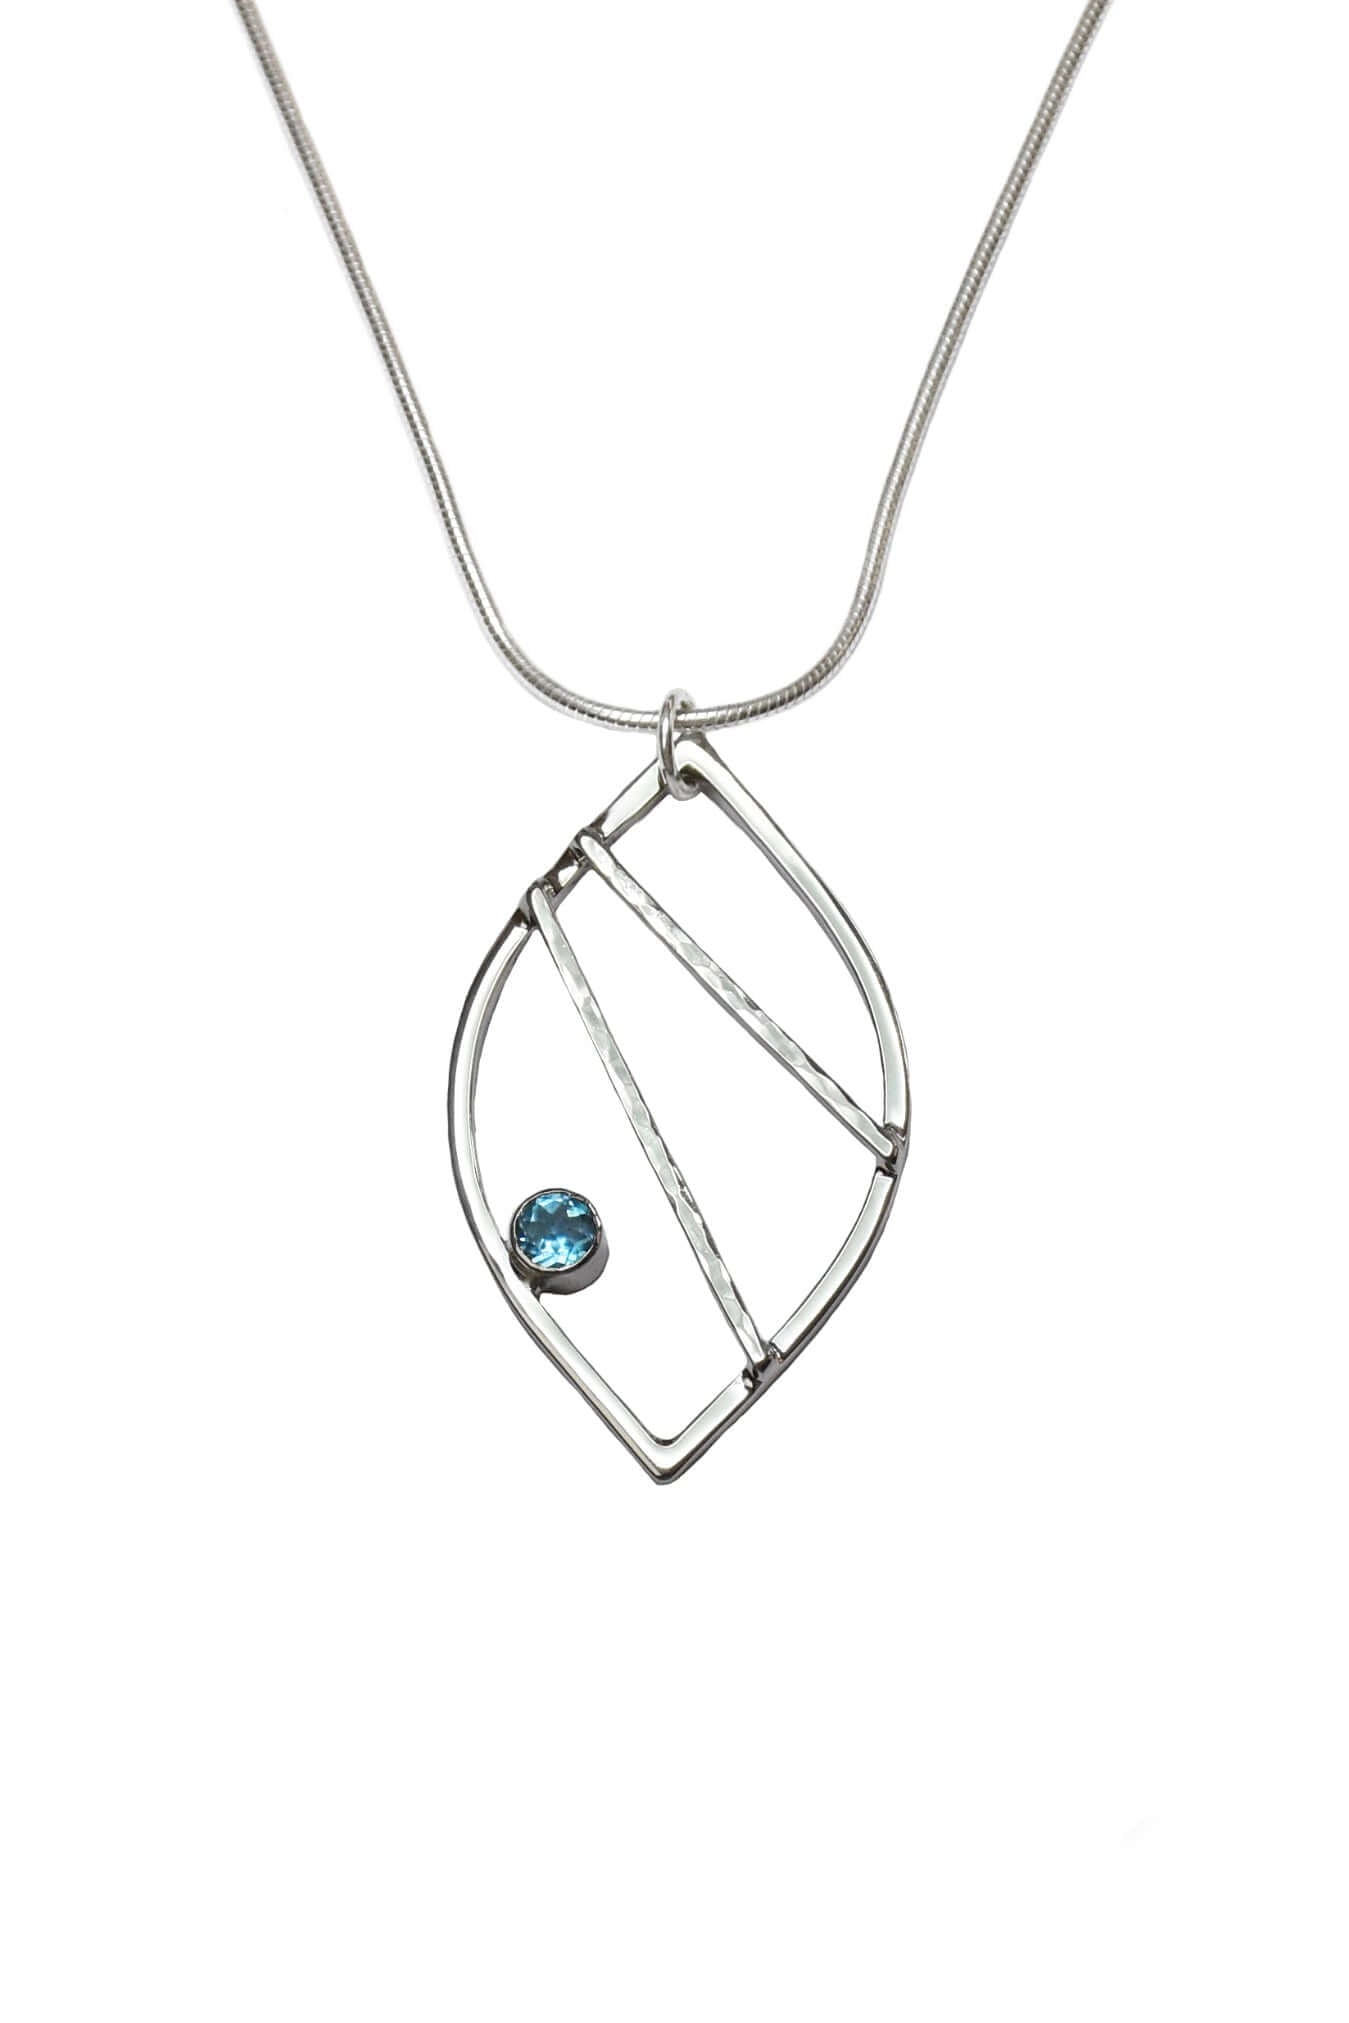 A handmade sterling silver leaf shaped necklace with crossbars and swiss blue topaz